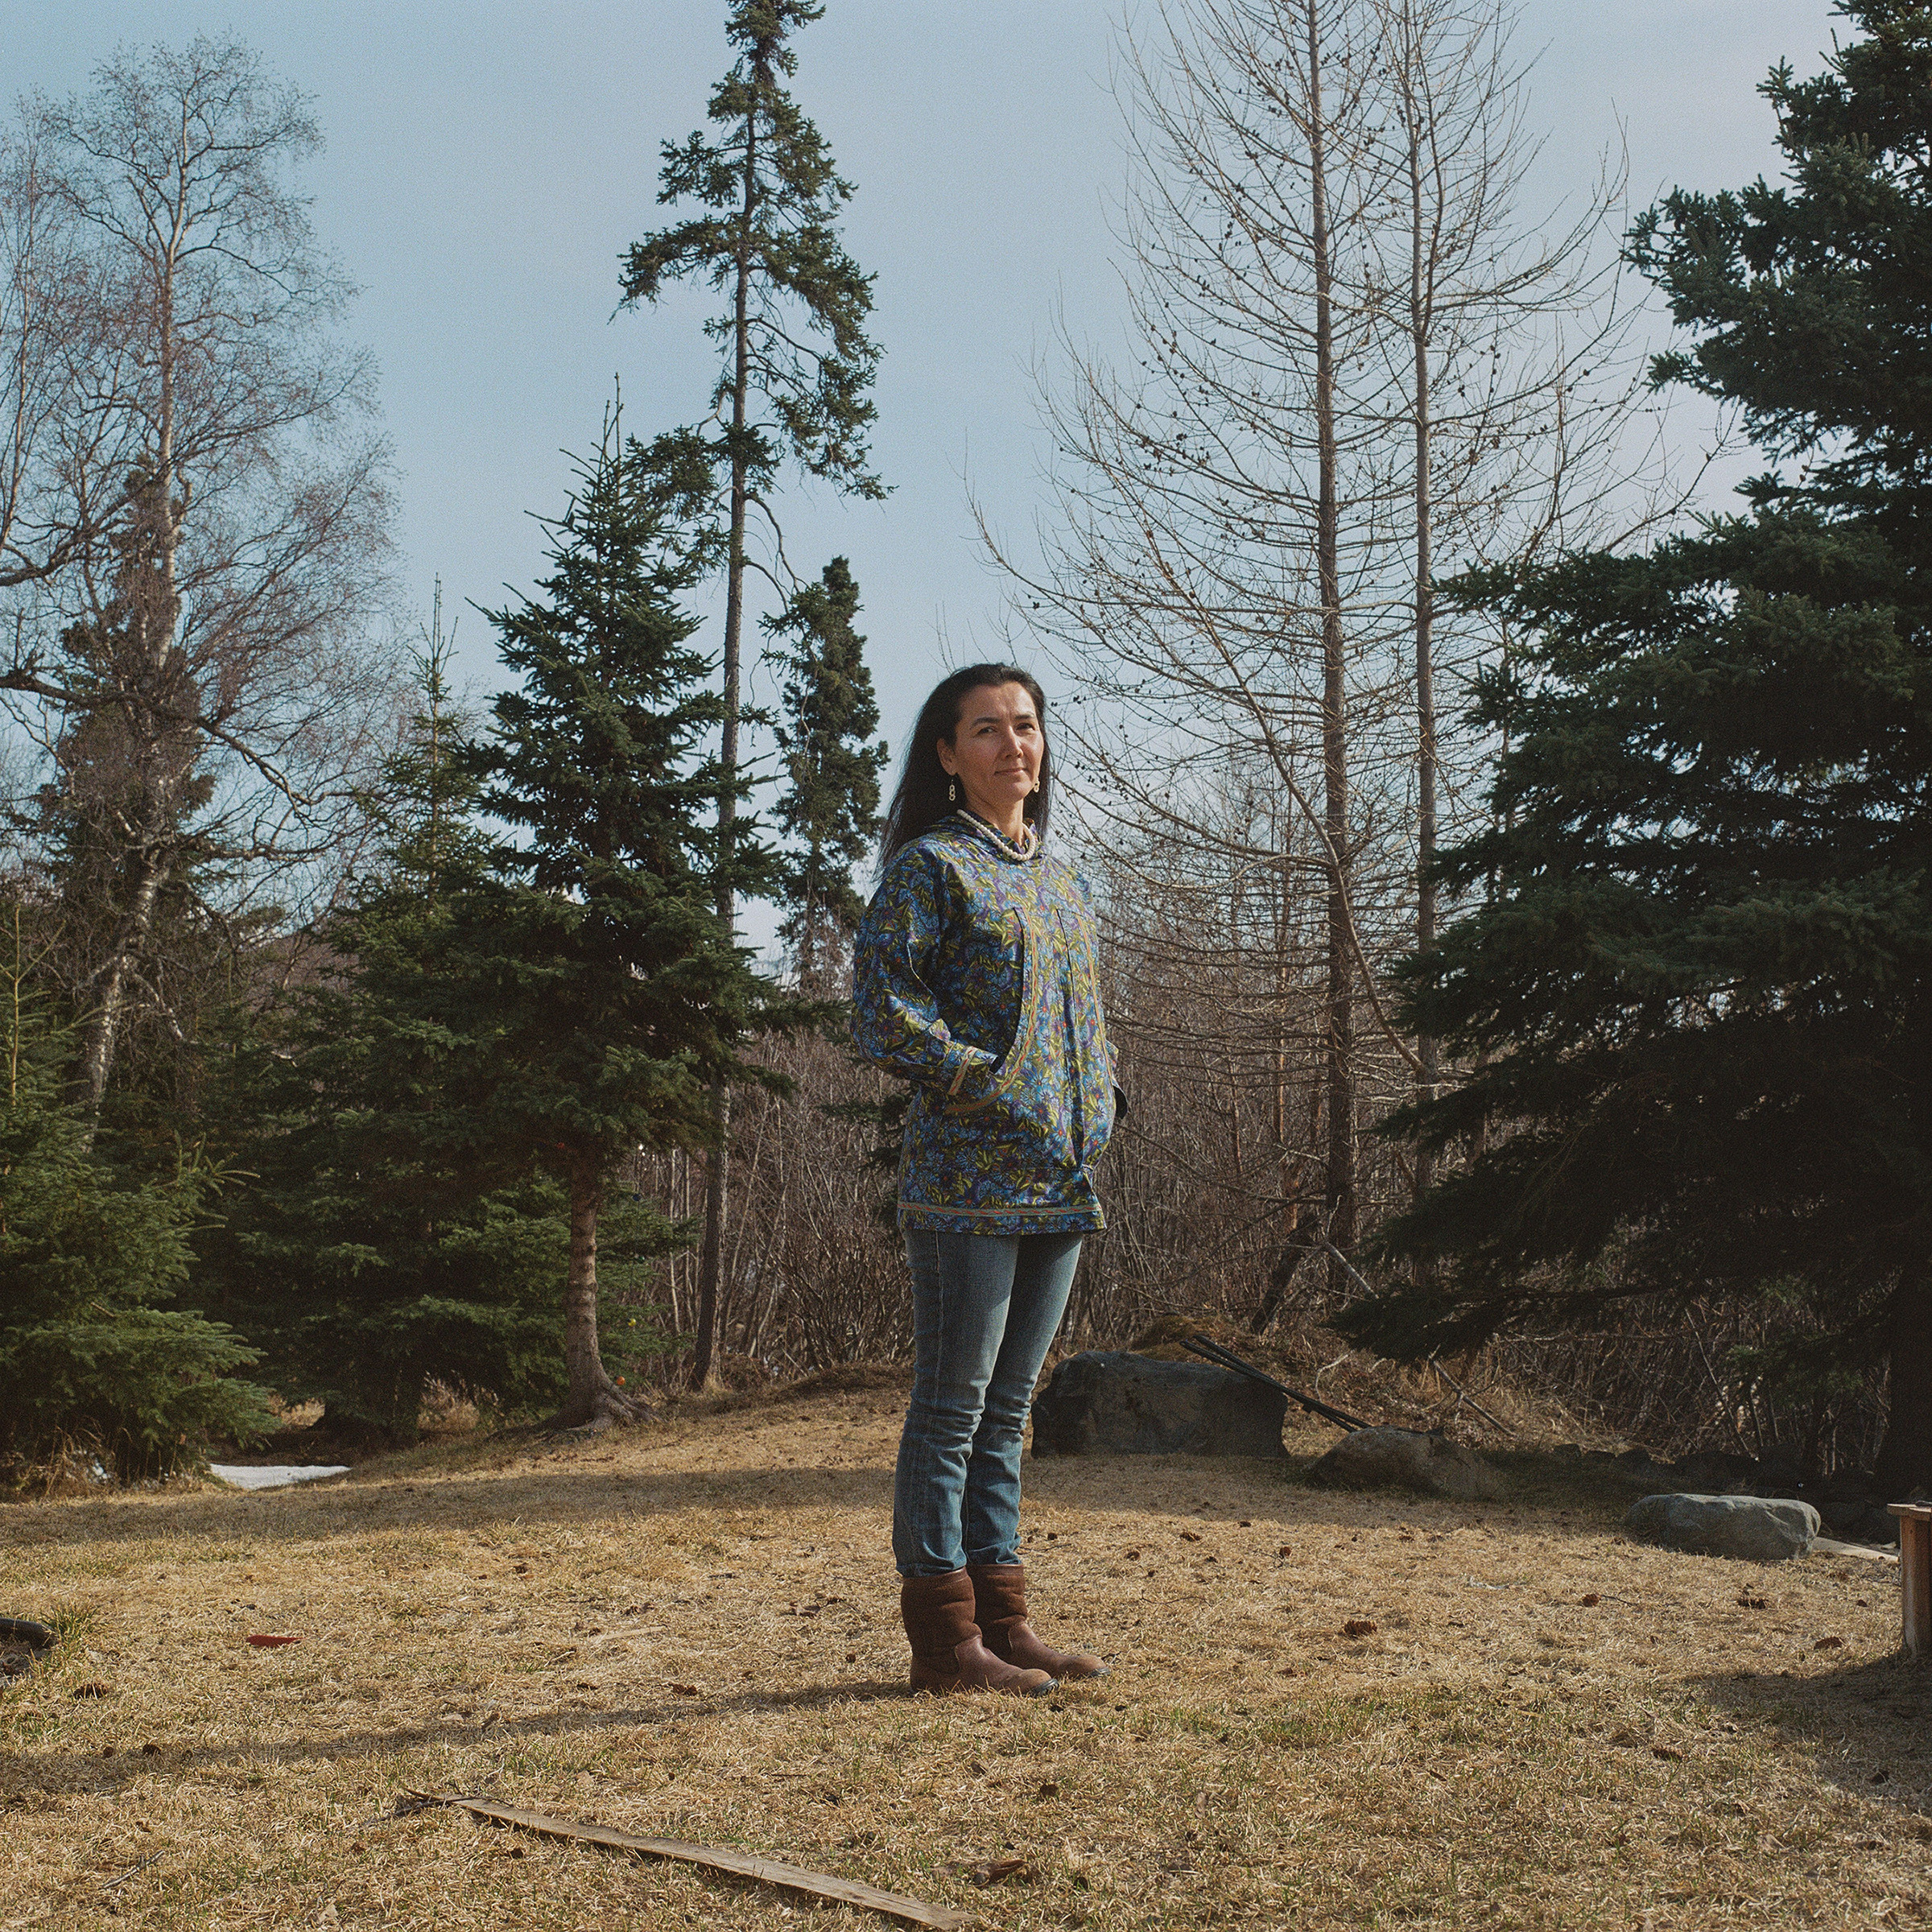 Mary Peltola, a Democrat who spent a decade in the state legislature and is an enrolled member of the Yup’ik tribe, at her home in Anchorage, Alaska on April 13, 2022. (Ash Adams—The New York Times/Redux)